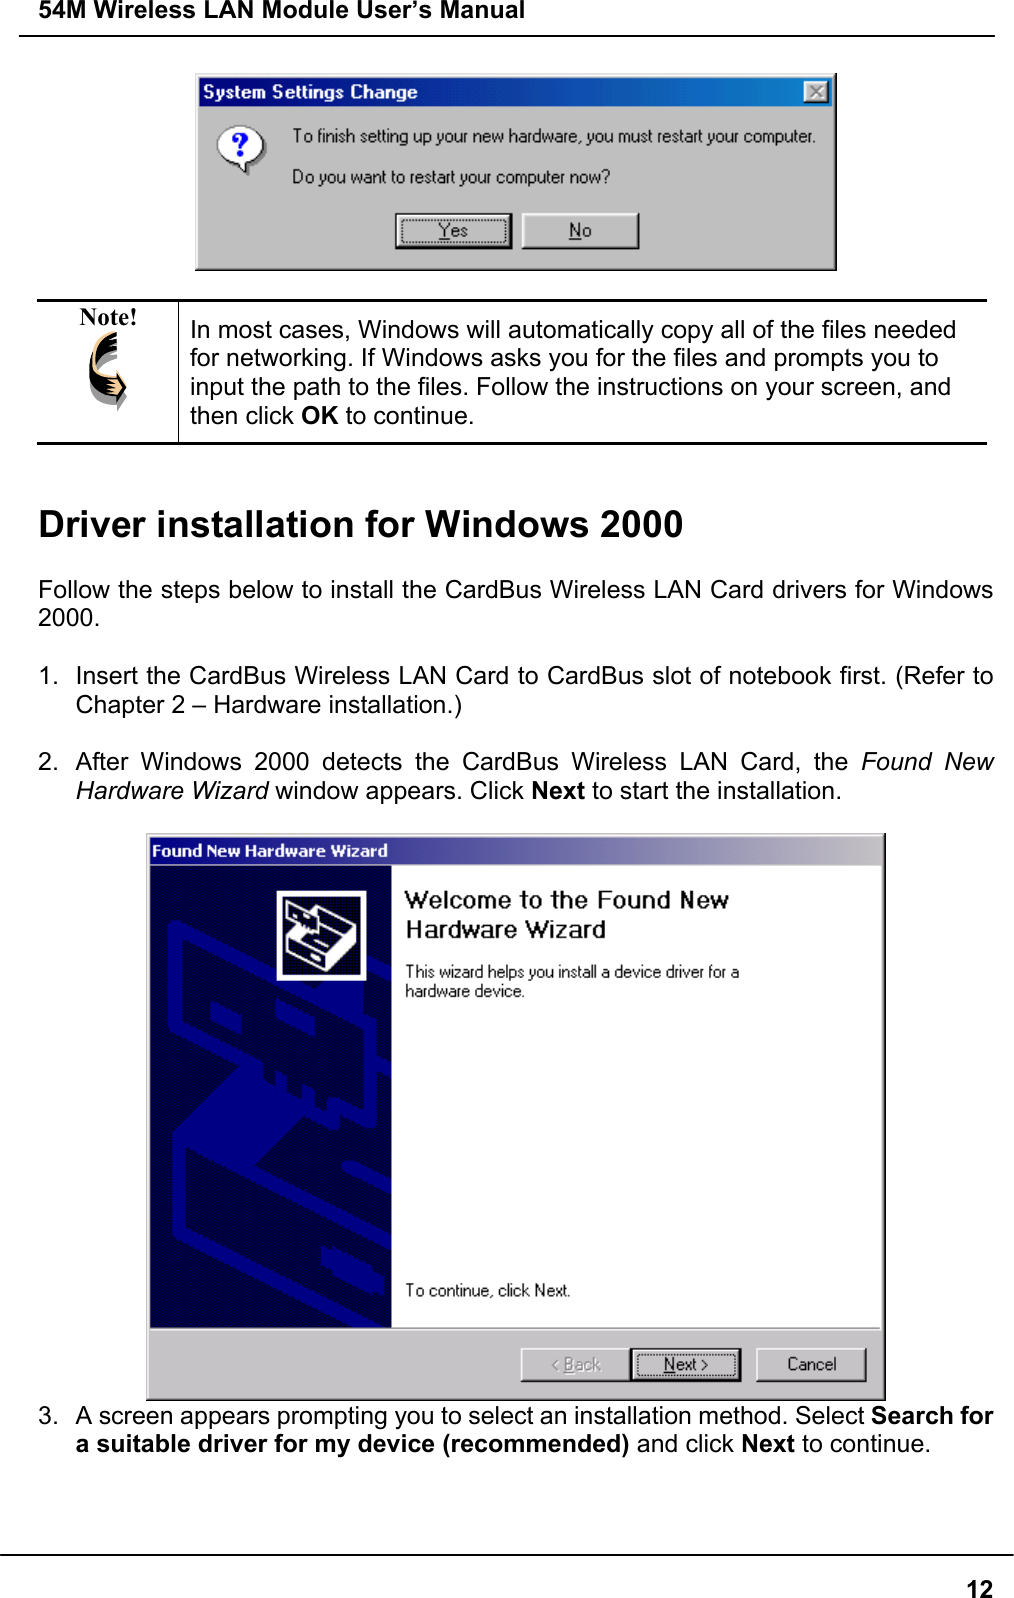 54M Wireless LAN Module User’s Manual12Note! In most cases, Windows will automatically copy all of the files neededfor networking. If Windows asks you for the files and prompts you toinput the path to the files. Follow the instructions on your screen, andthen click OK to continue.Driver installation for Windows 2000Follow the steps below to install the CardBus Wireless LAN Card drivers for Windows2000.1.  Insert the CardBus Wireless LAN Card to CardBus slot of notebook first. (Refer toChapter 2 – Hardware installation.)2.  After Windows 2000 detects the CardBus Wireless LAN Card, the Found NewHardware Wizard window appears. Click Next to start the installation.3.  A screen appears prompting you to select an installation method. Select Search fora suitable driver for my device (recommended) and click Next to continue.